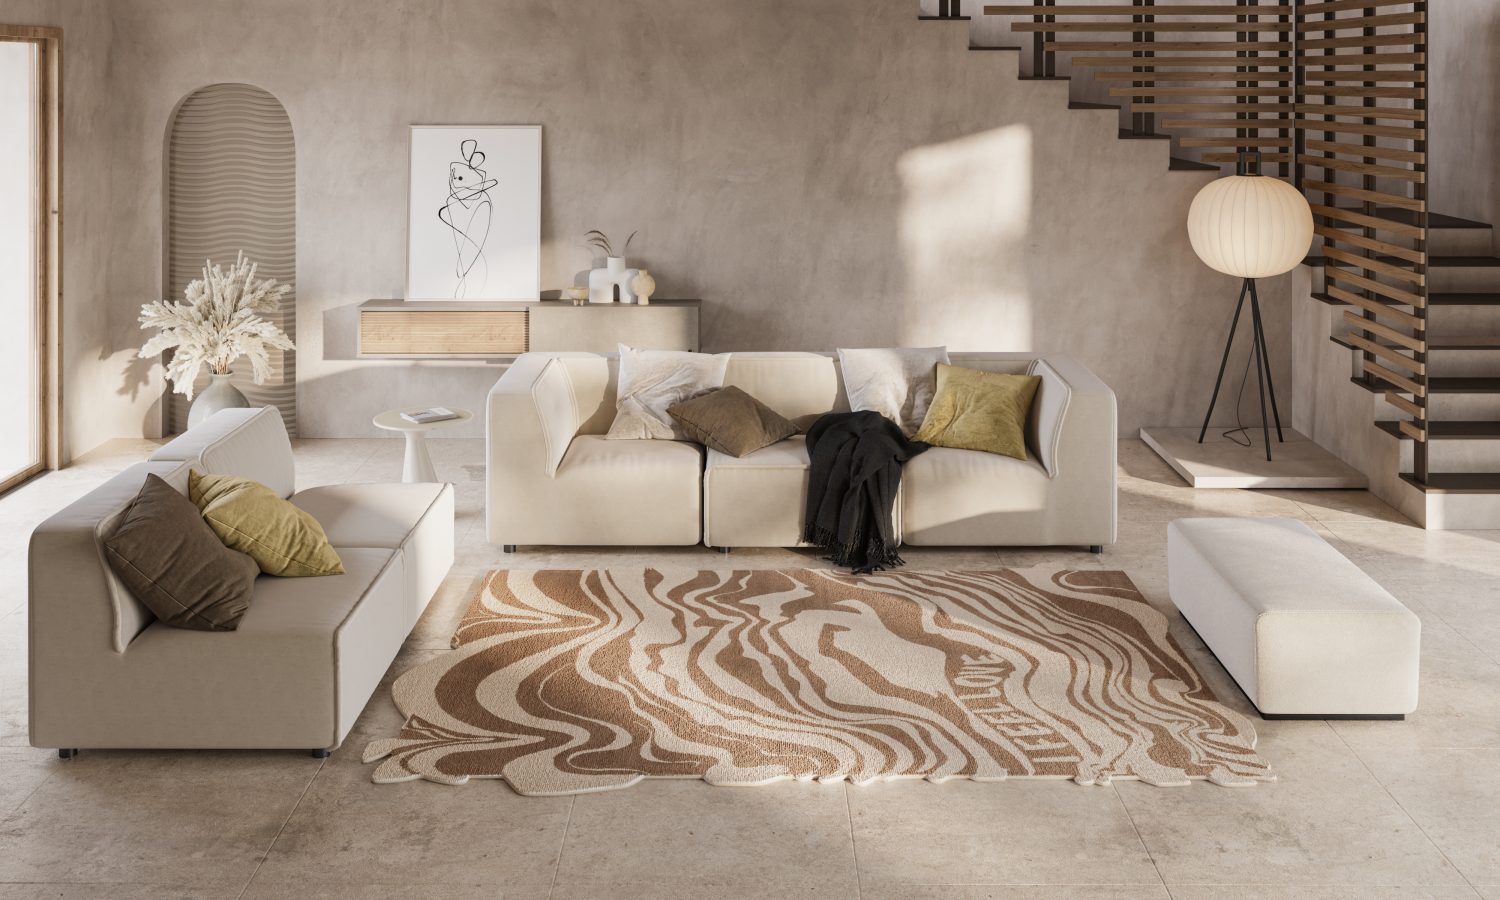 Woollen Henry Holland Shaped I Feel Love rug, pictured in neutral contemporary space.